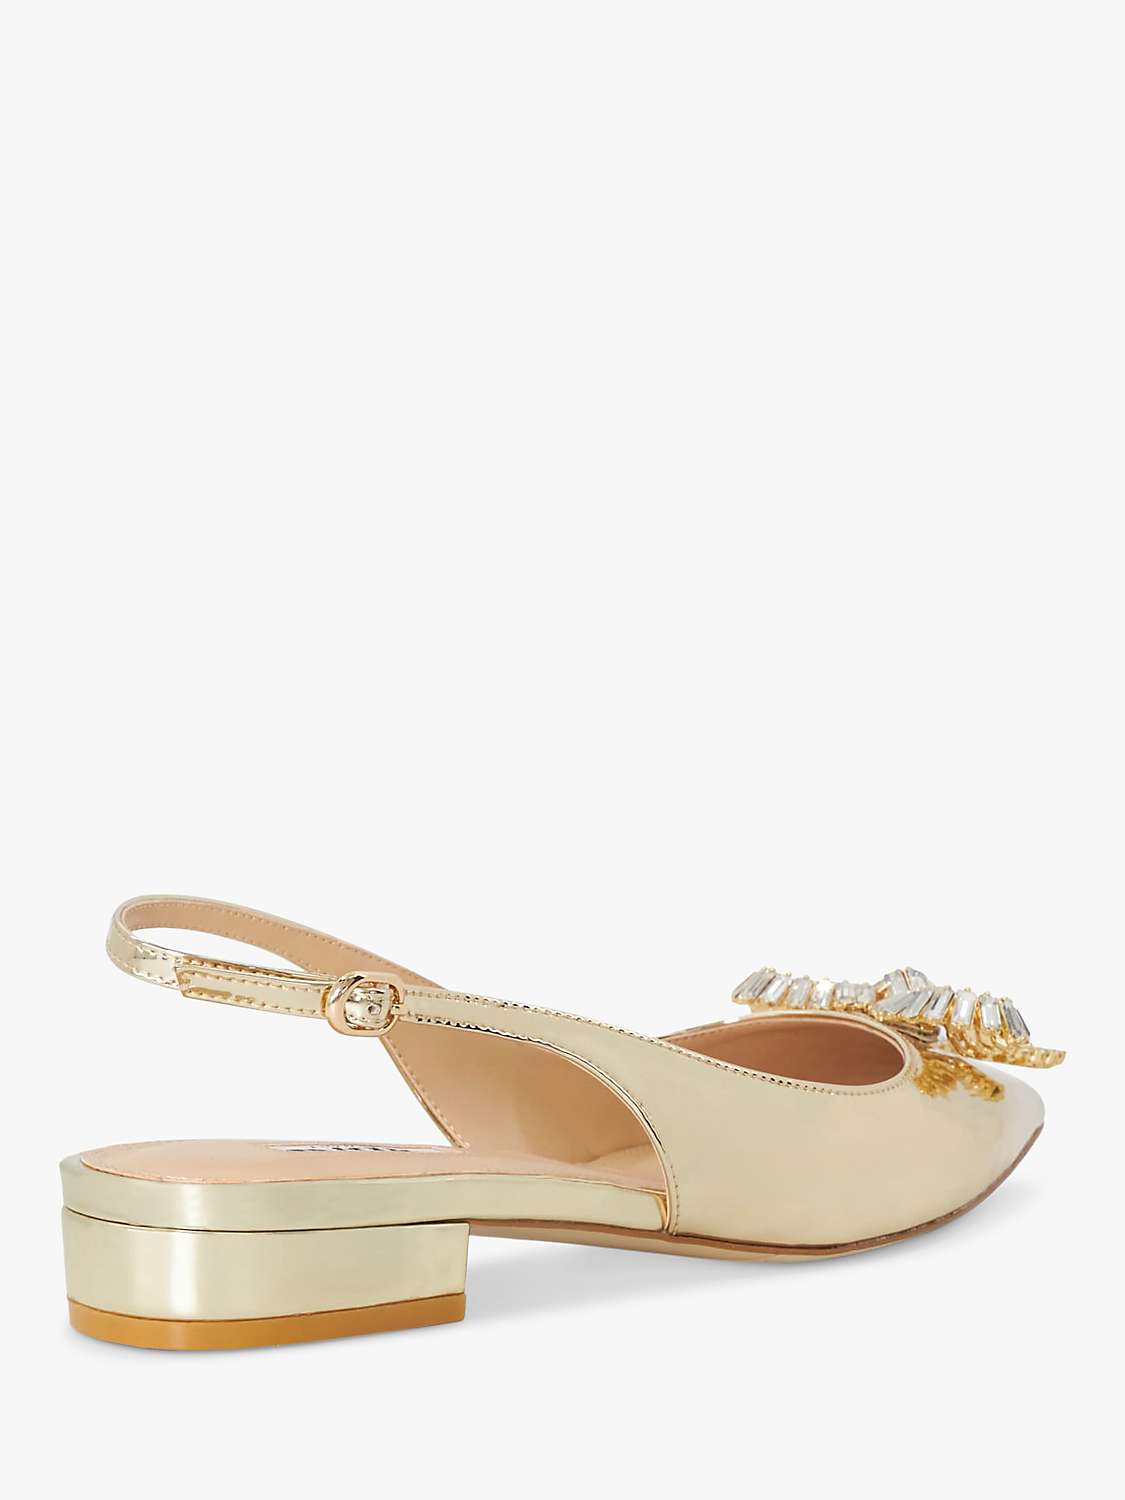 Buy Dune Happiest Patent Bow Embellished Slingback Flats, Gold Online at johnlewis.com